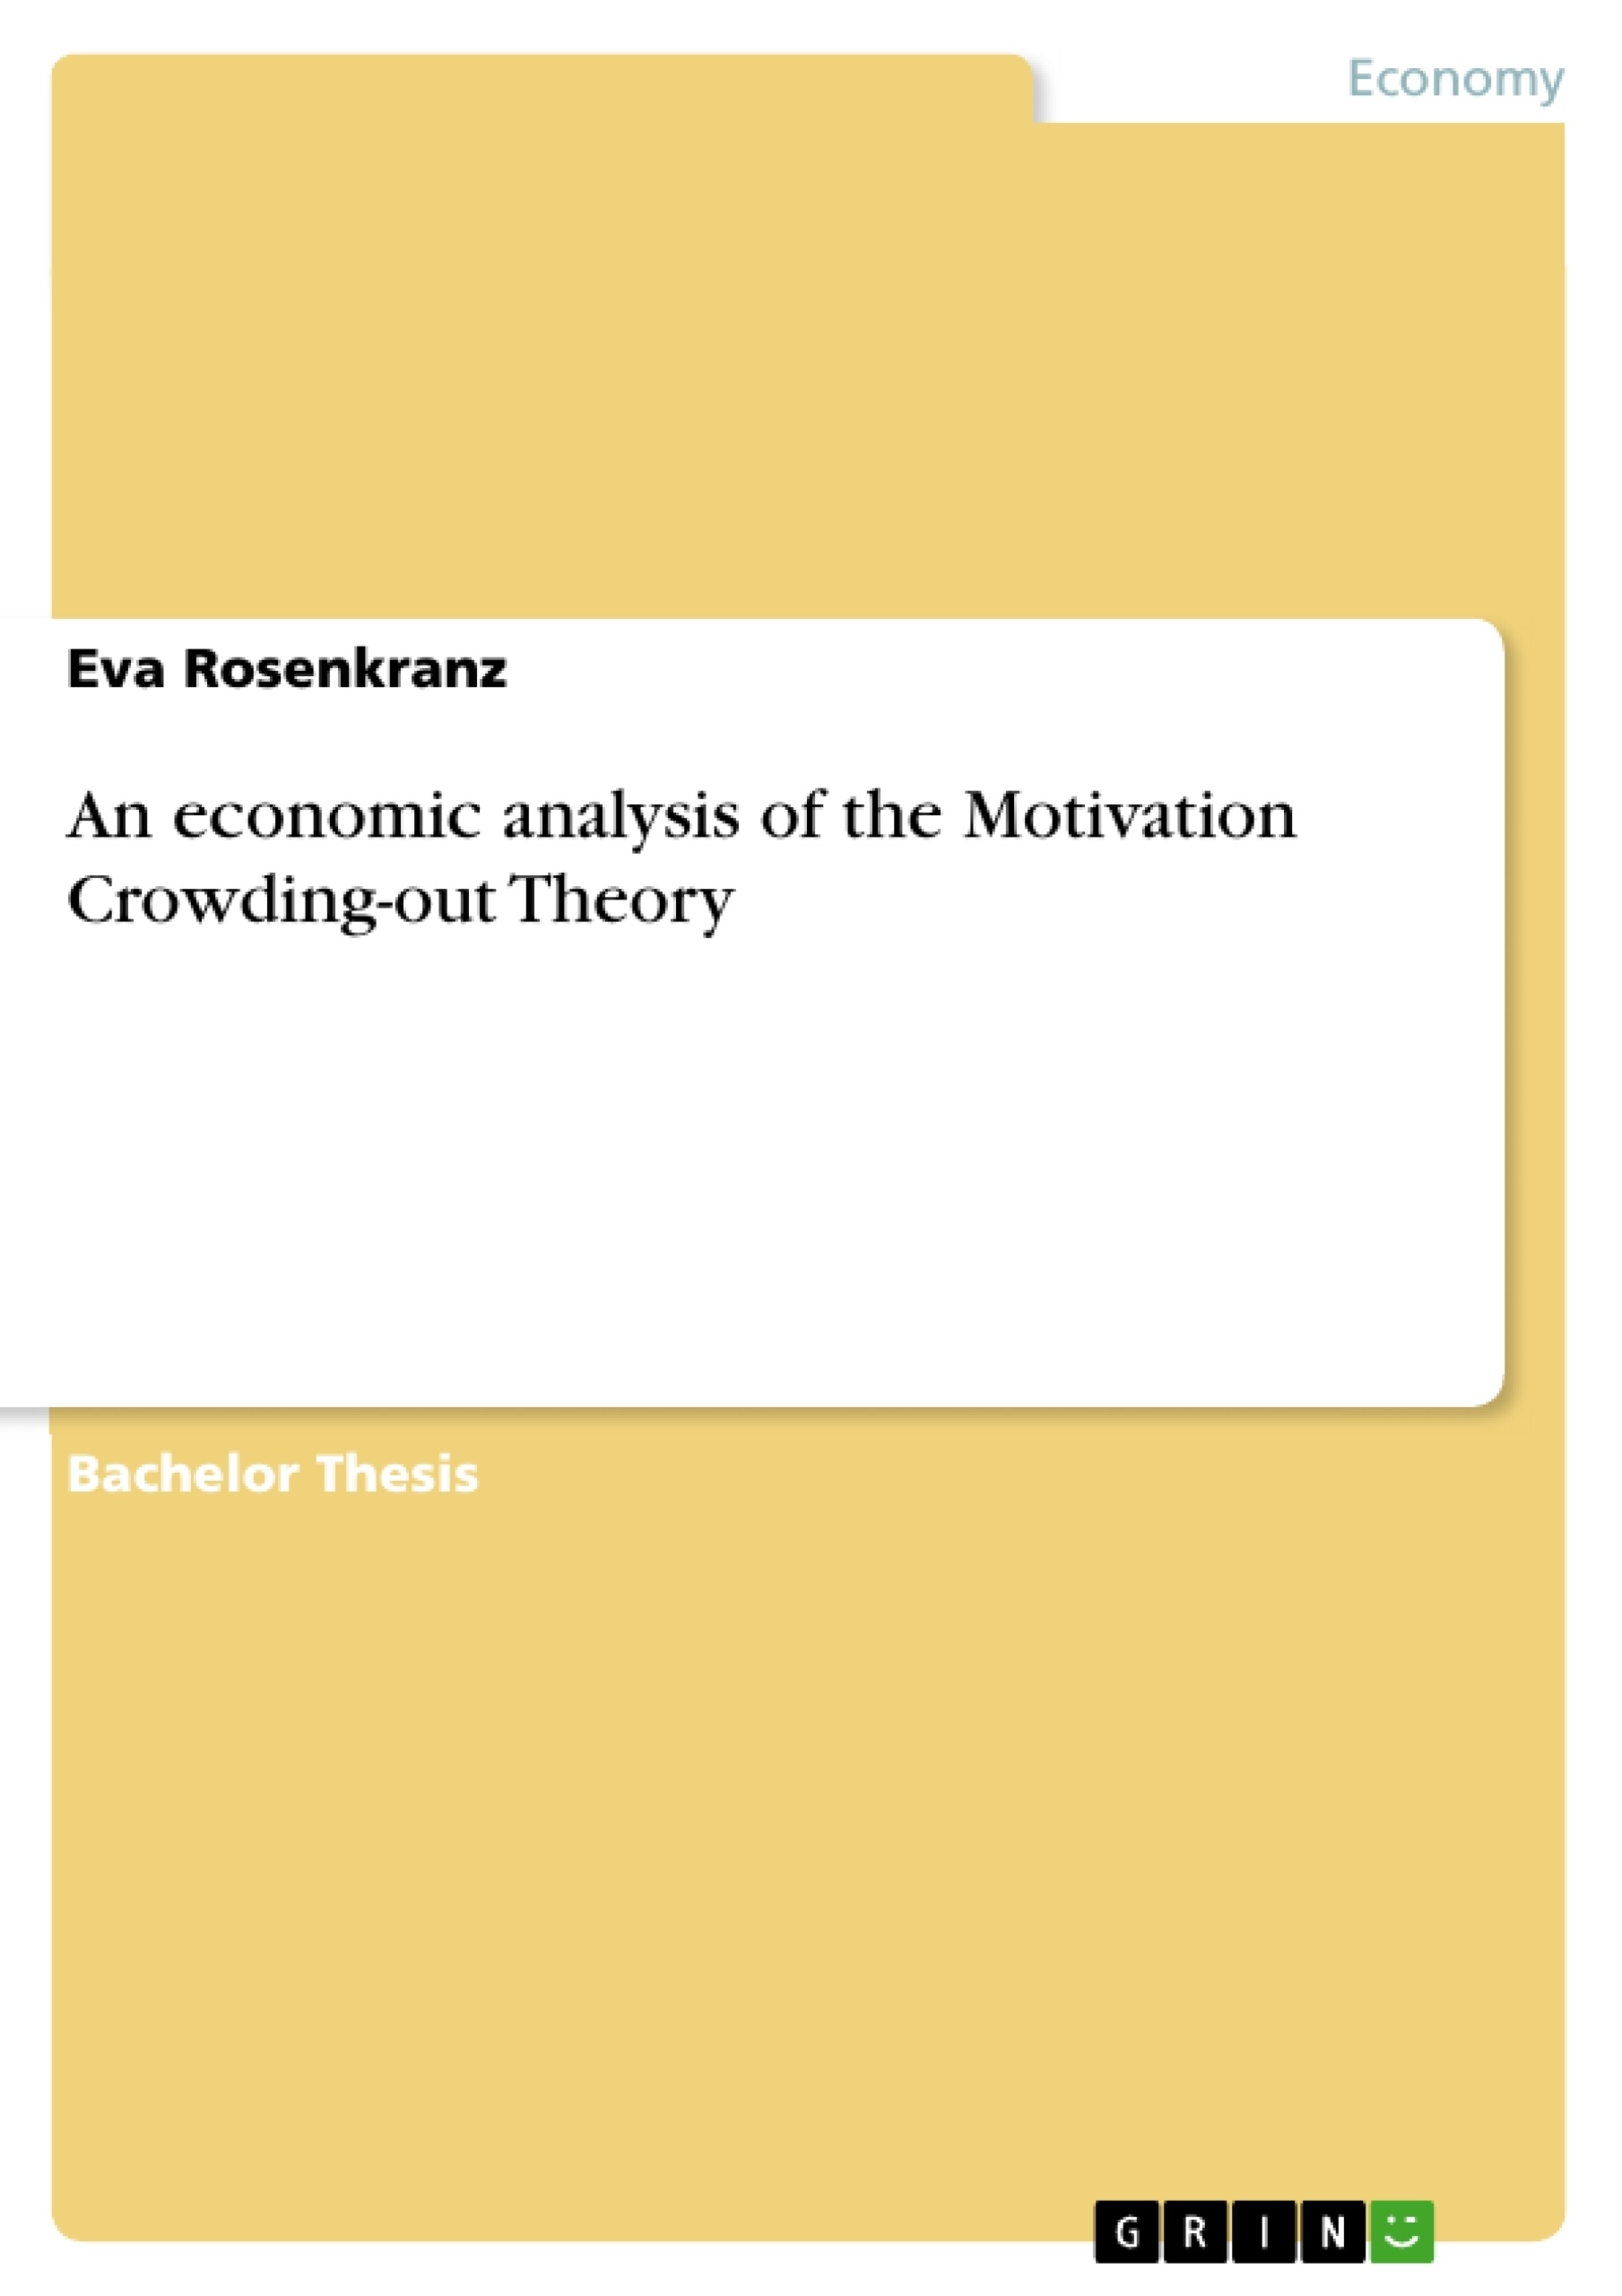 Title: An economic analysis of the Motivation Crowding-out Theory